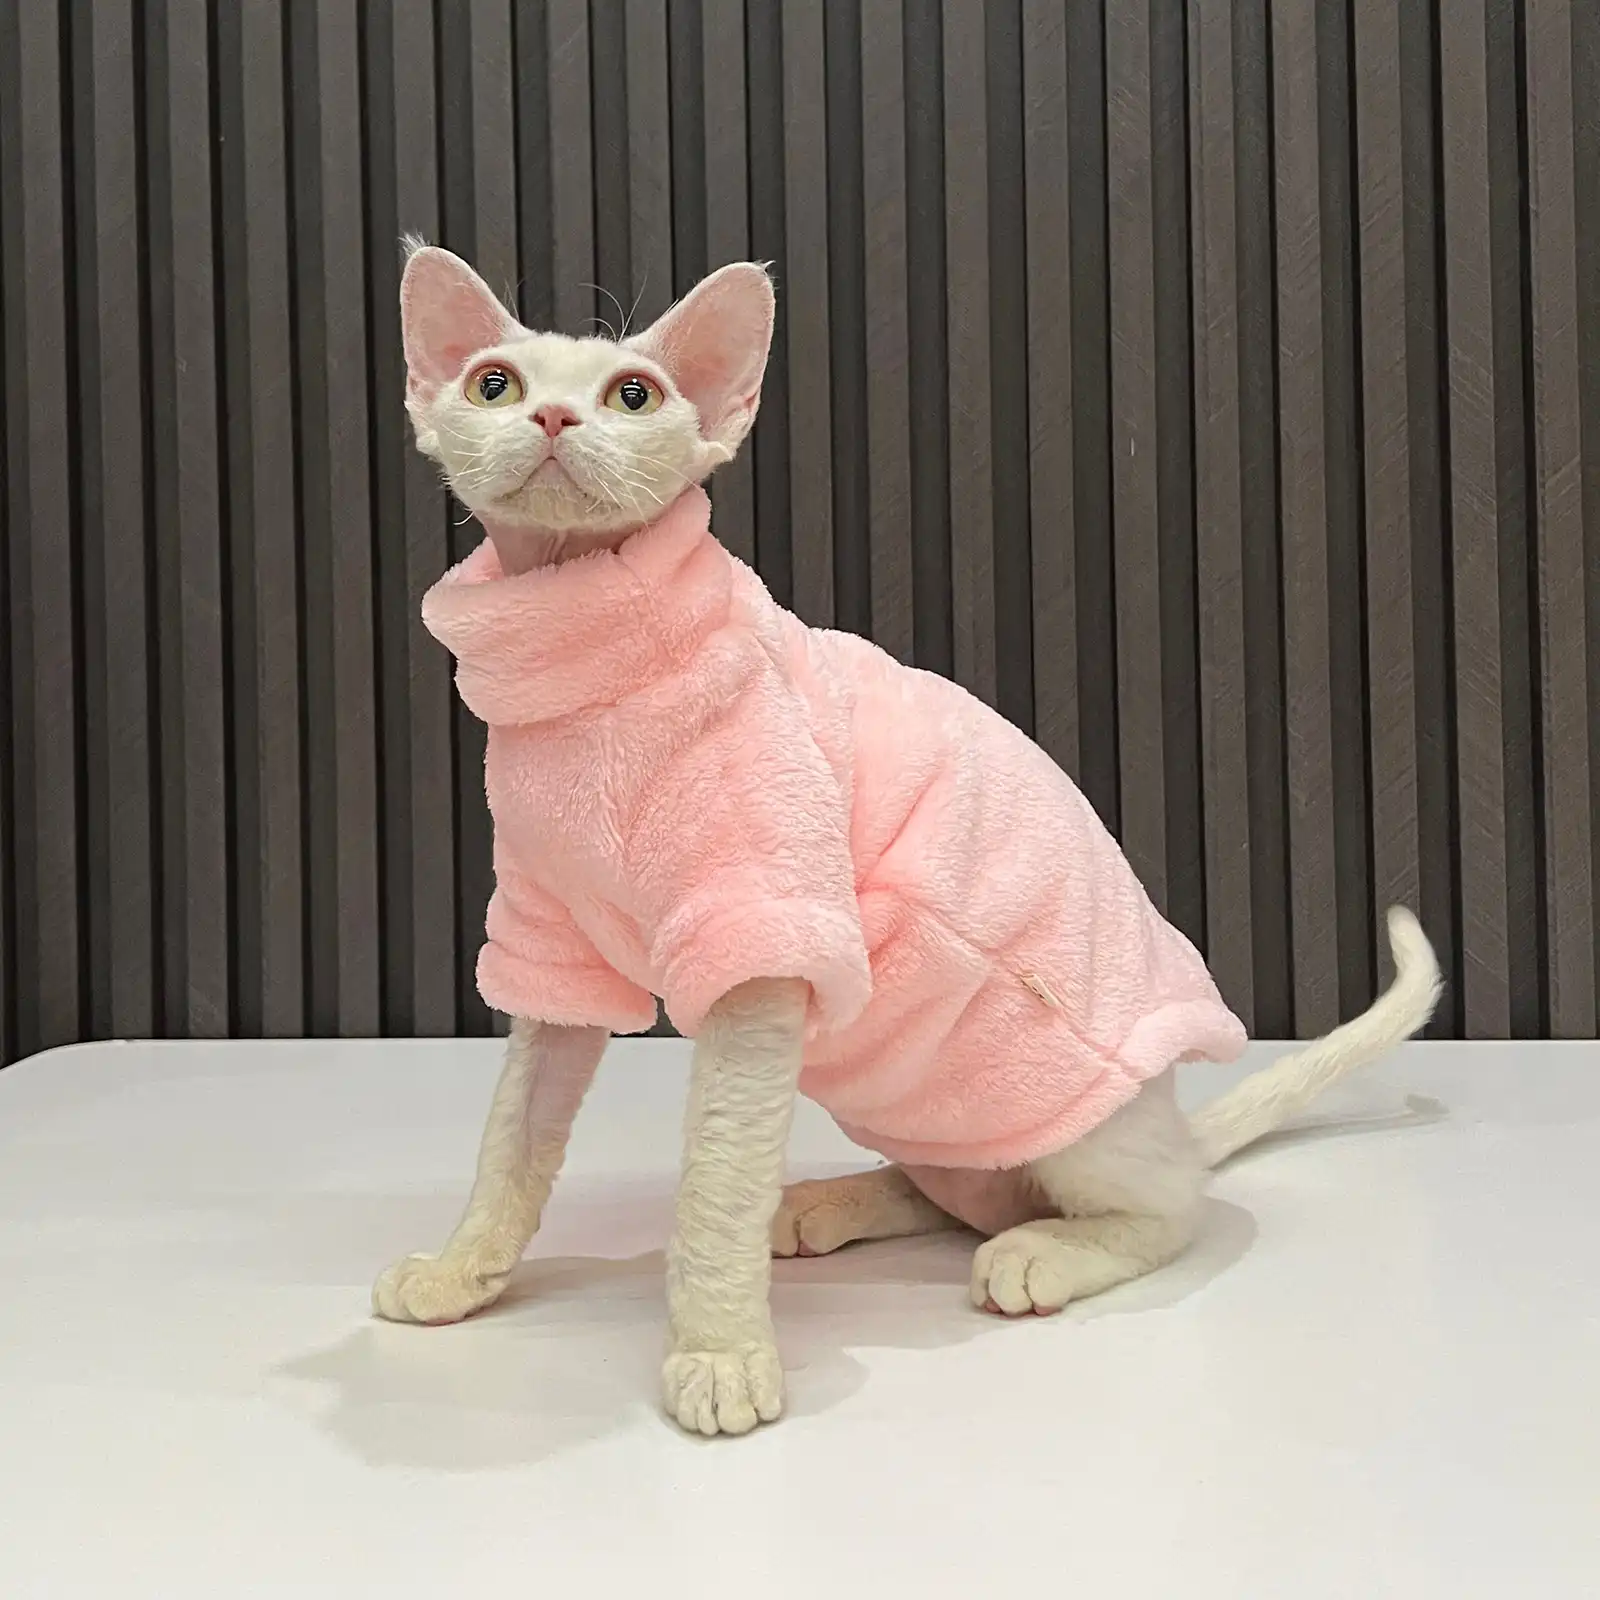 Bonaweite Sphynx Cat Clothes, Cat Sweaters for Cats Only, Turtleneck Sphynx  Cat Sweaters, Cat Clothes for Cats Only, Svinx Hairless Cat T-Shirts Kitten  Clothes Onesie XS-2XL XS PurpleRed